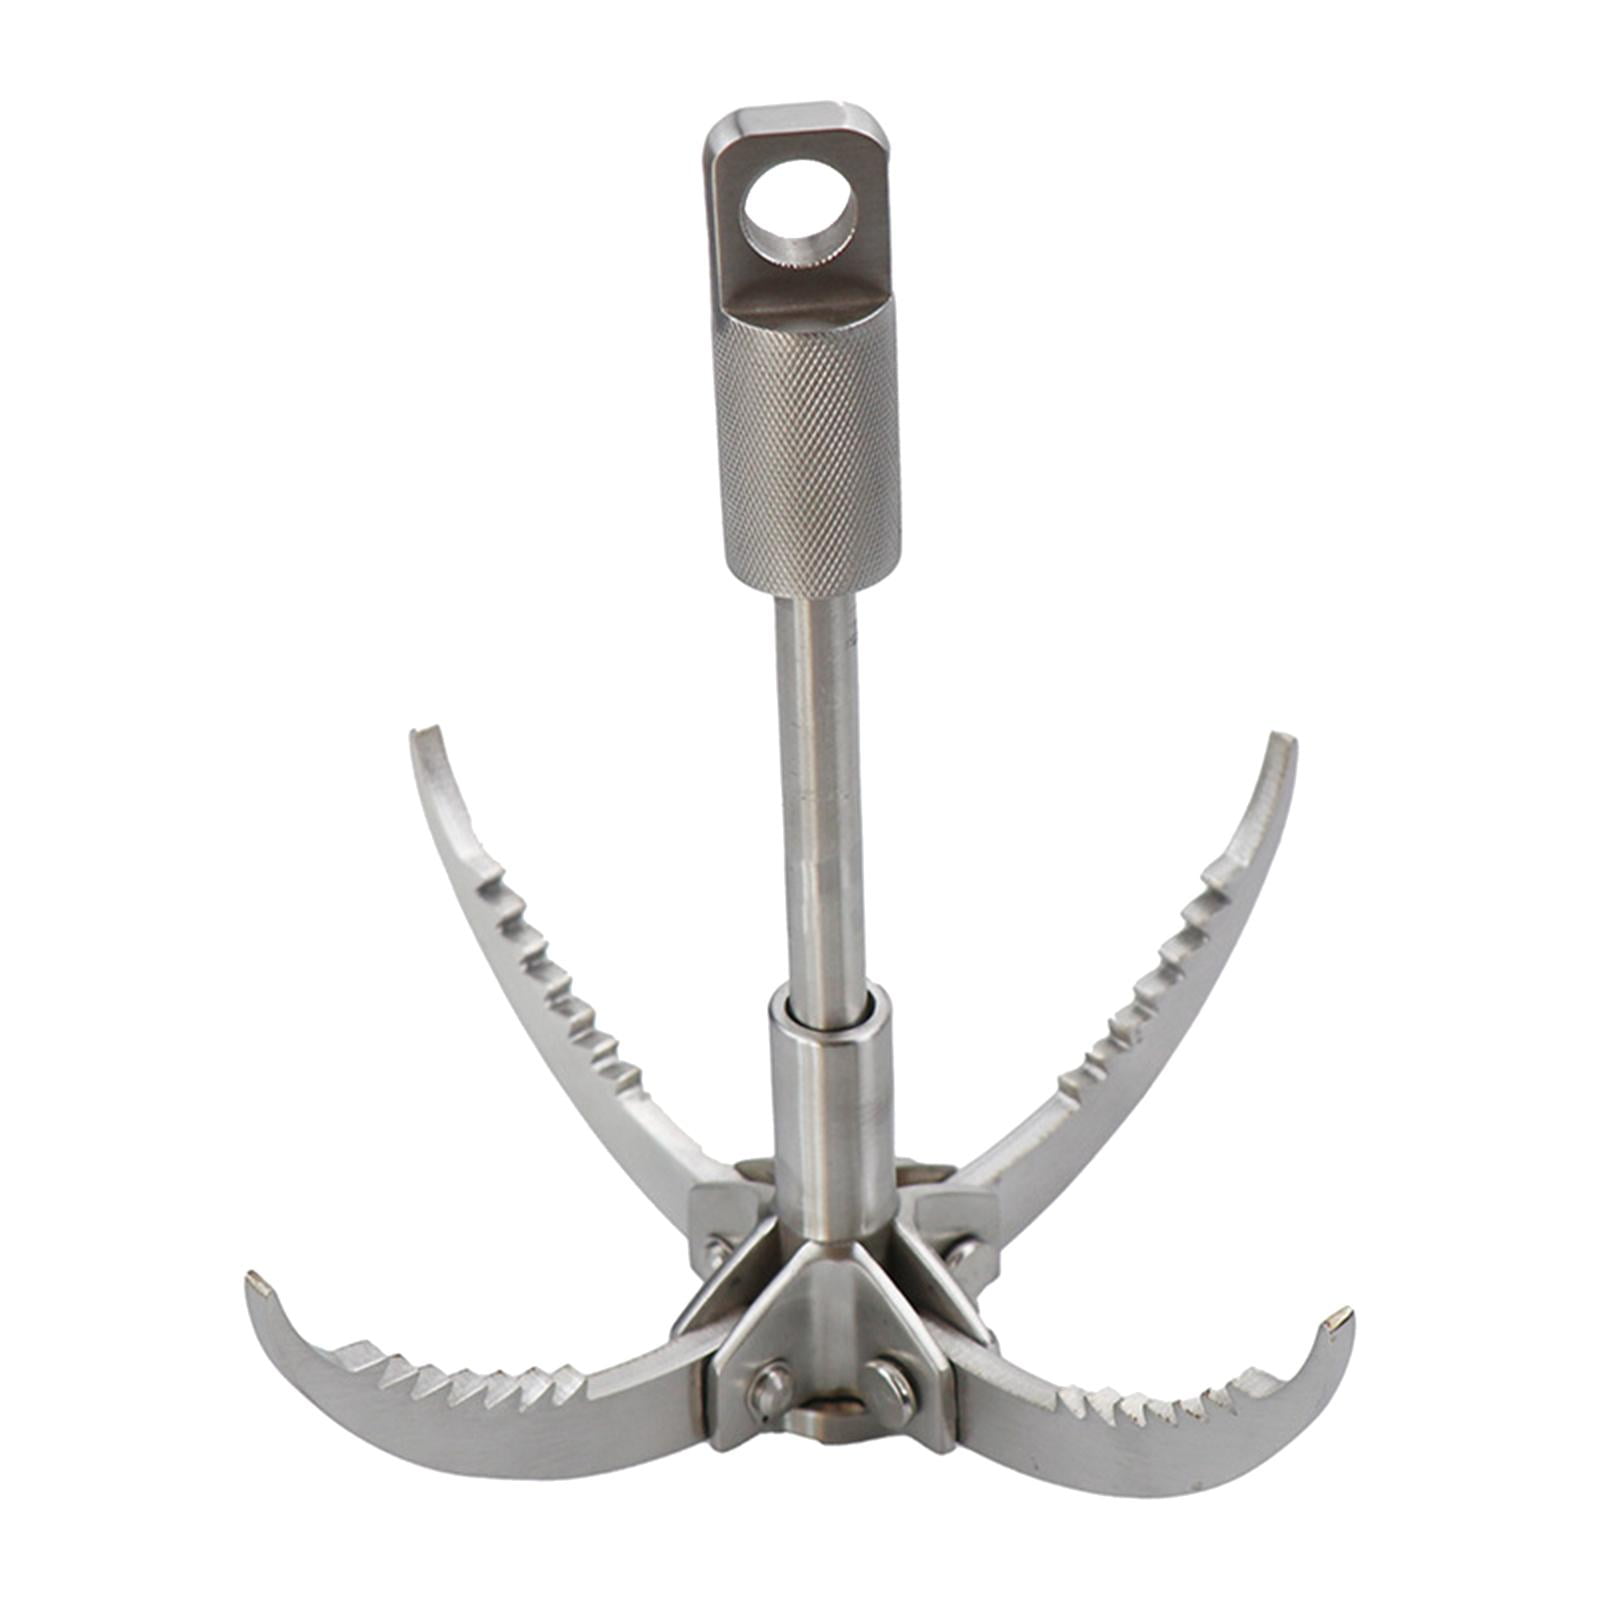 Grappling Hook Stainless Steel Folding Survival 4Claw For Climbing